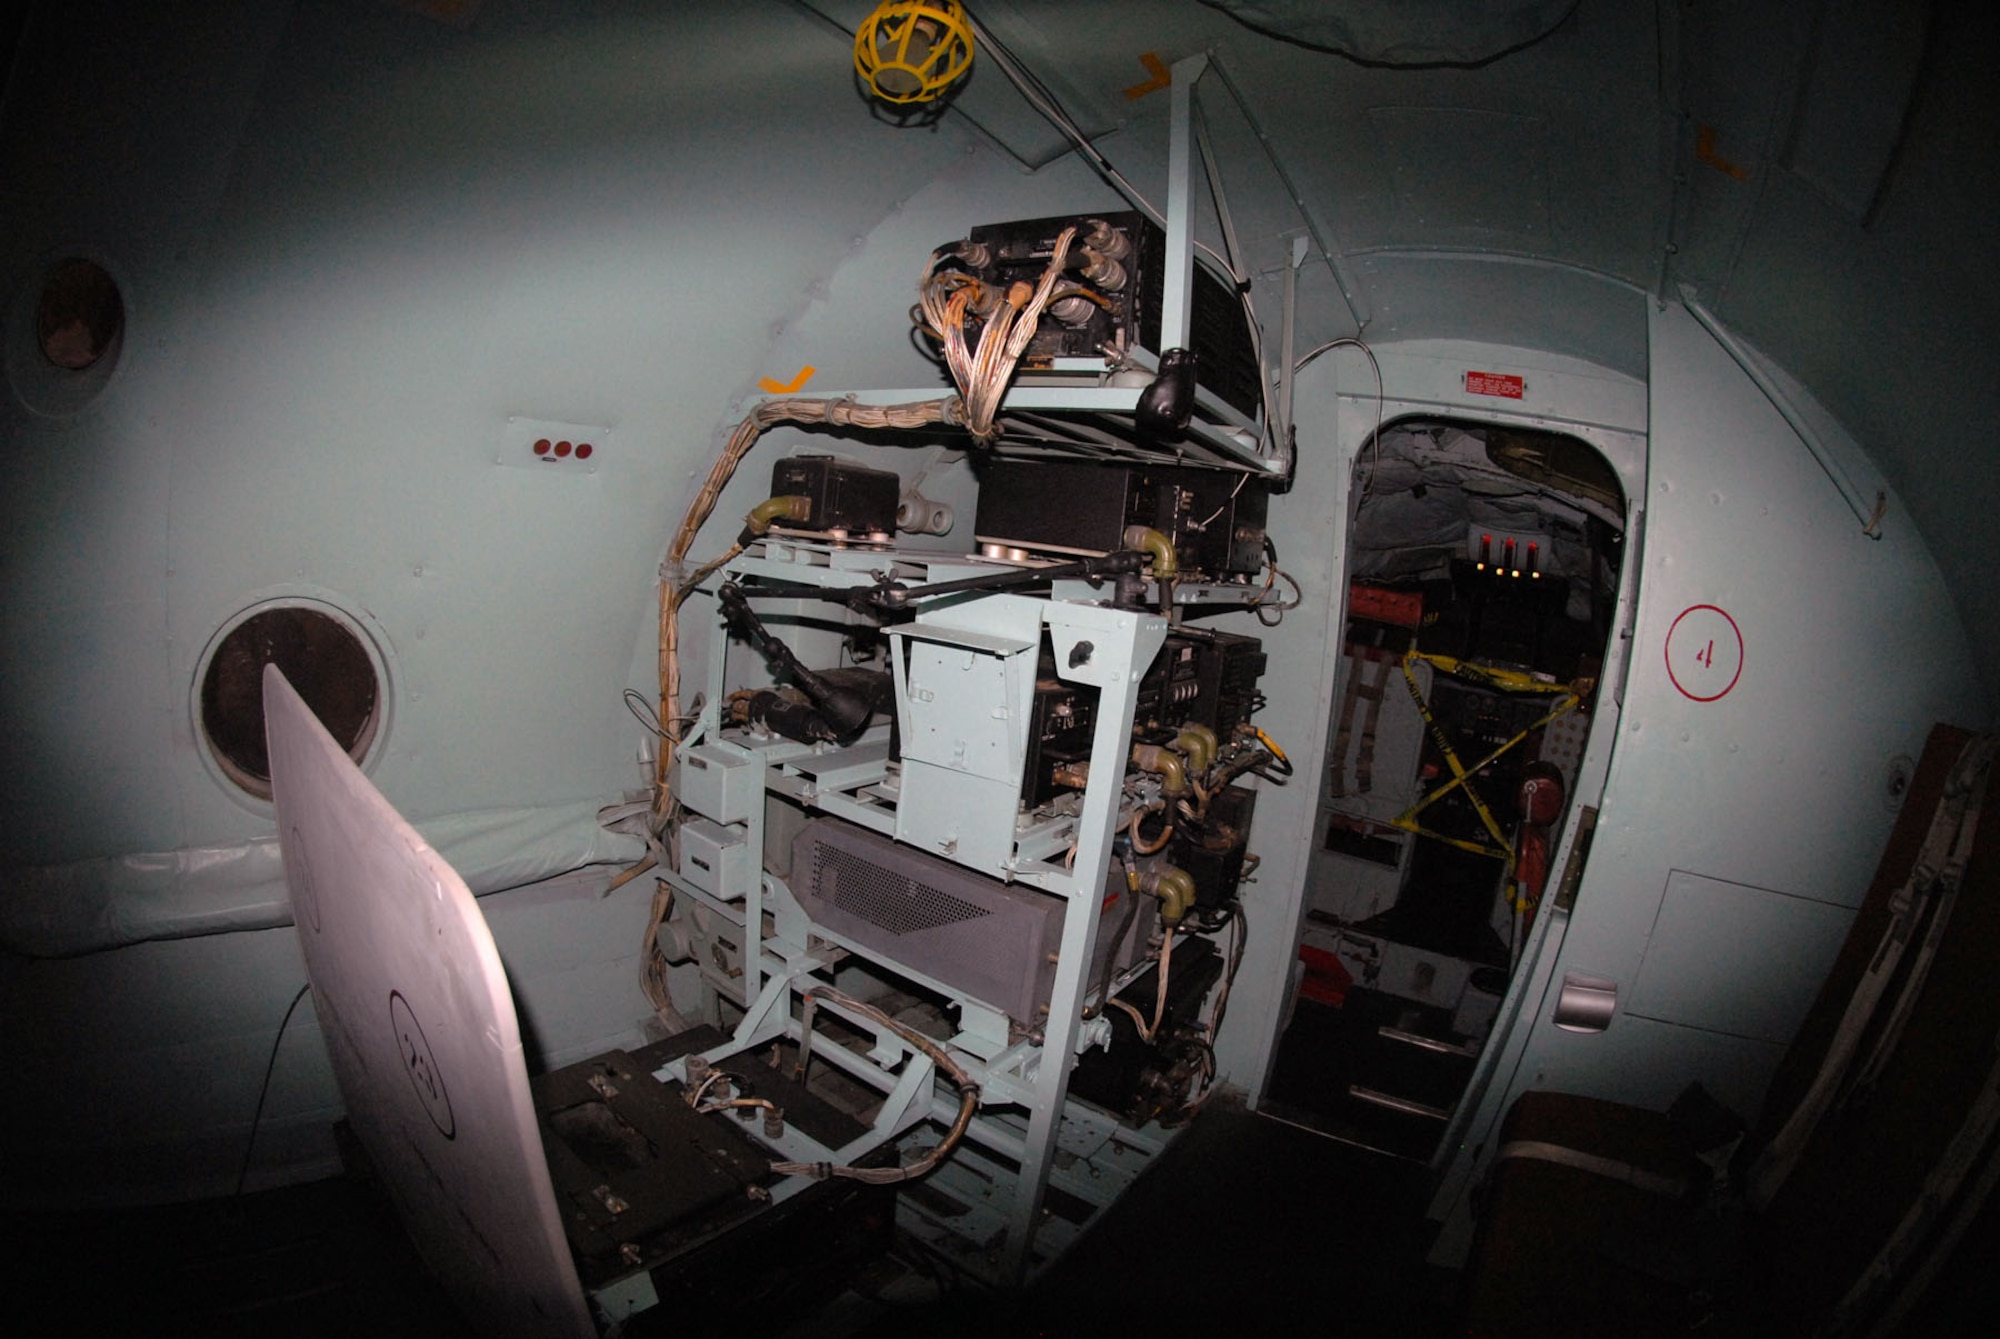 DAYTON, Ohio -- Lockheed EC-121D interior at the National Museum of the United States Air Force. (U.S. Air Force photo)